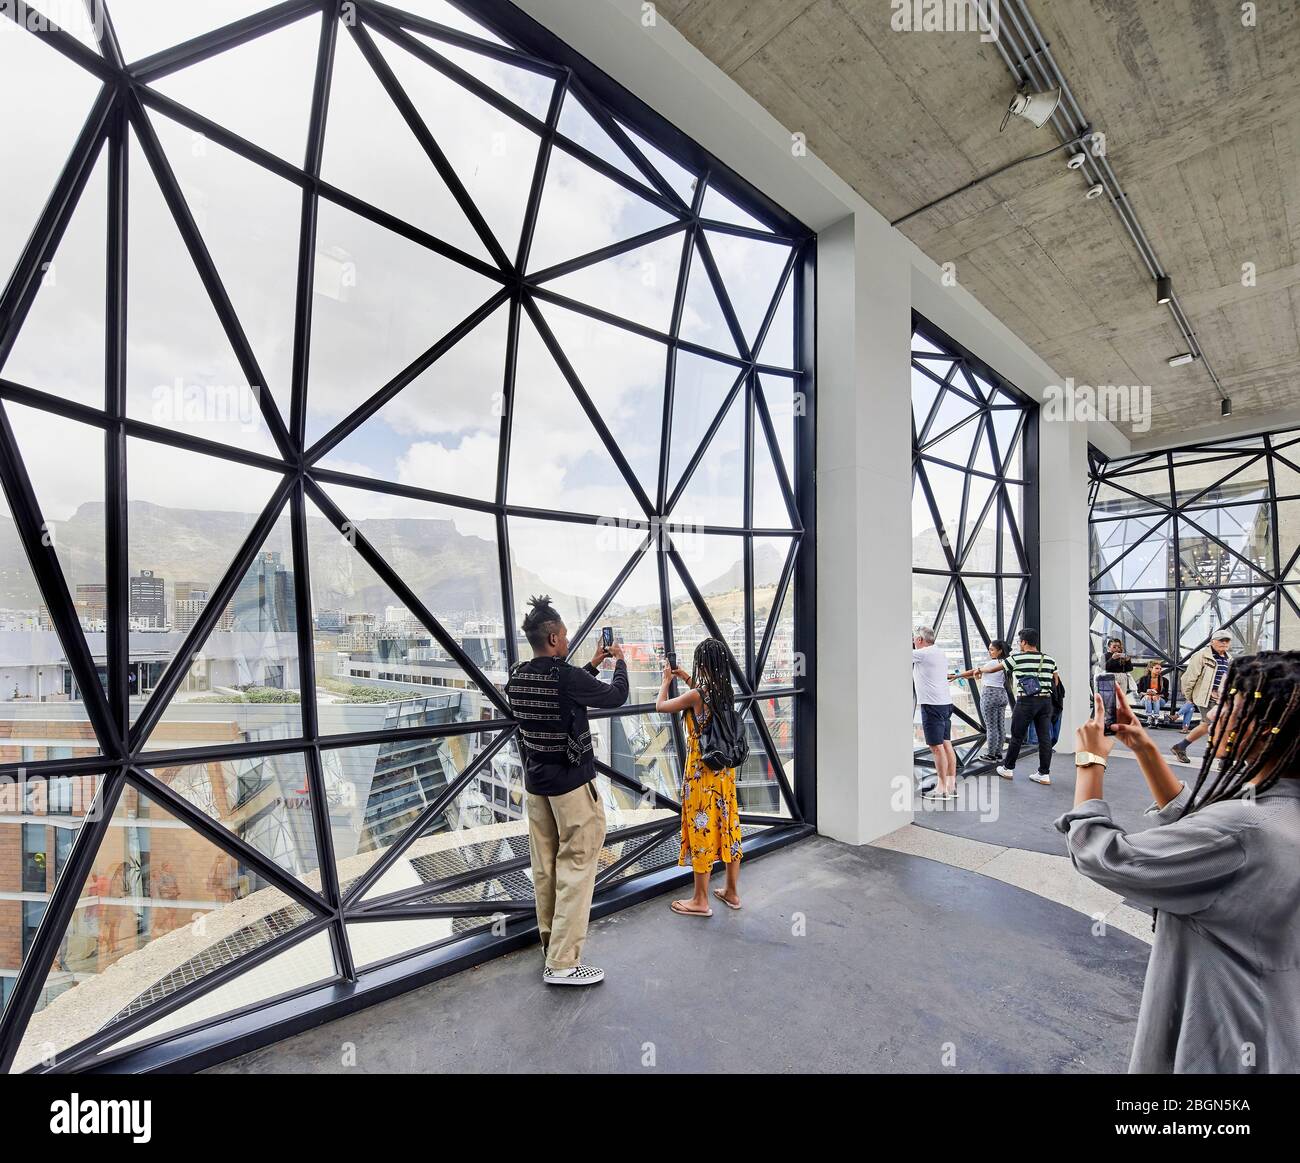 Interior view of cut-glass-faceted windows with visitors taking  photographs. Zeitz MOCAA, Cape Town, South Africa. Architect: Heatherwick Studio, 201 Stock Photo